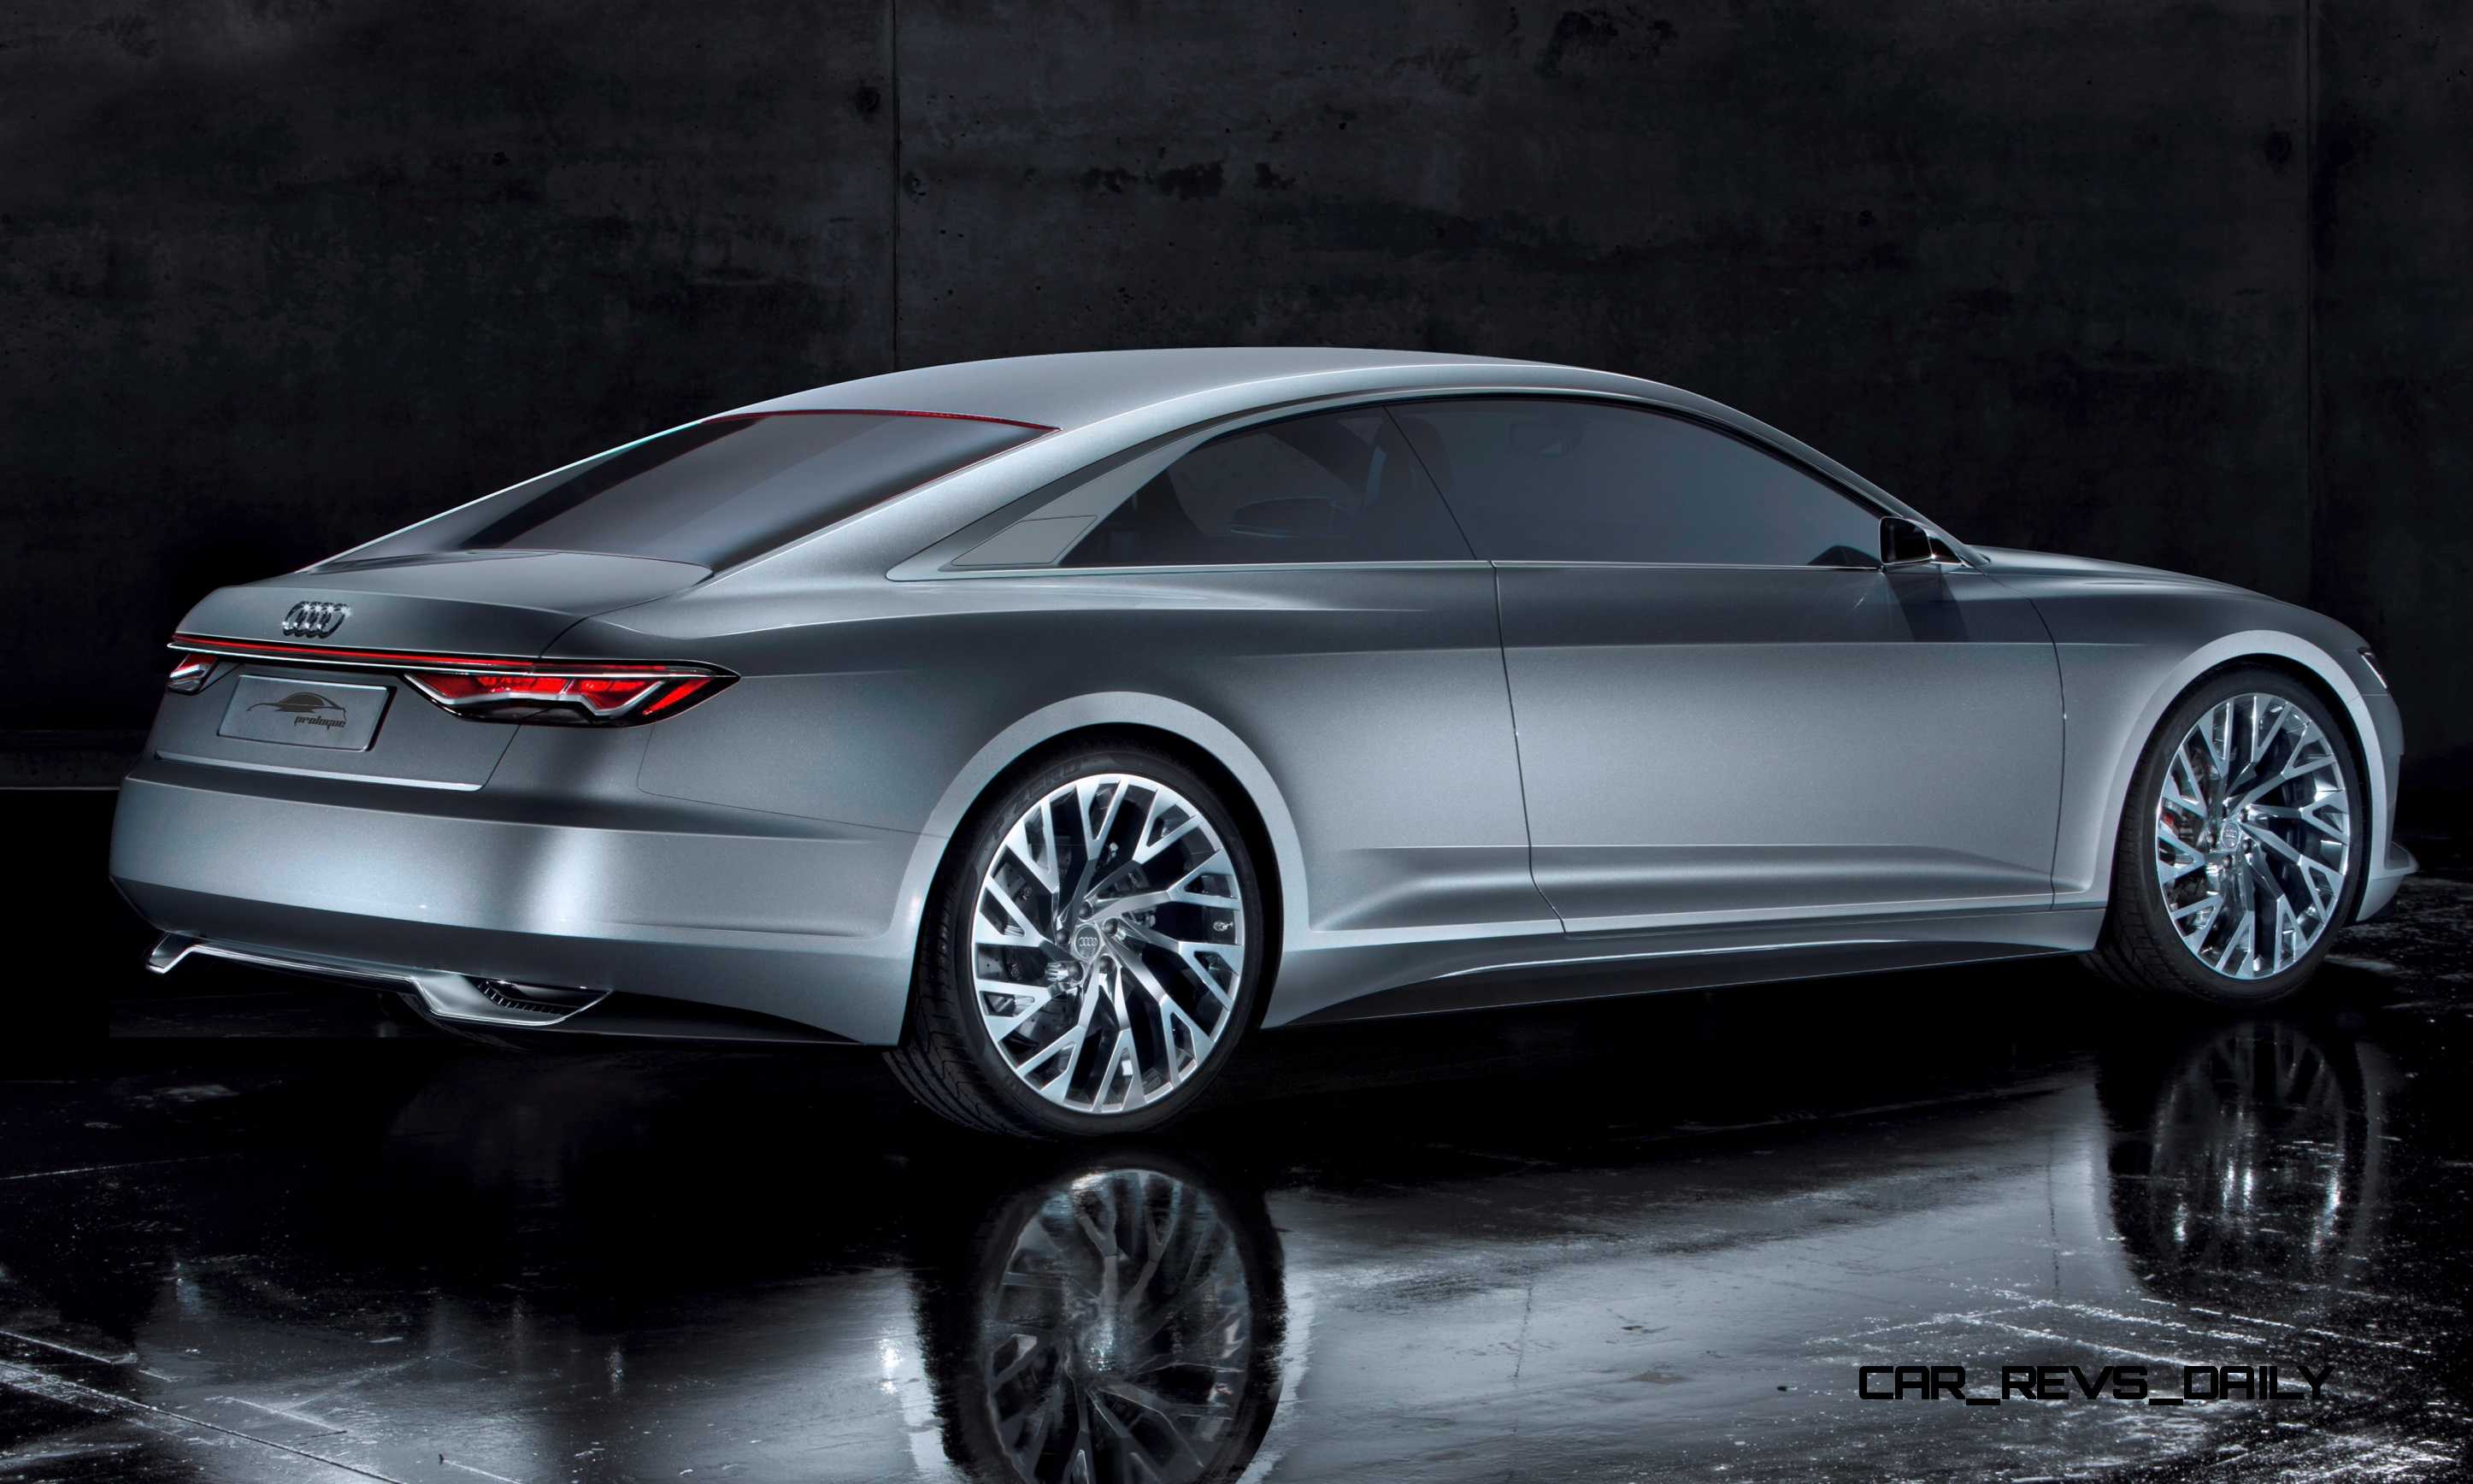 The Future Of Luxury: The 2014 Audi Prologue Concept